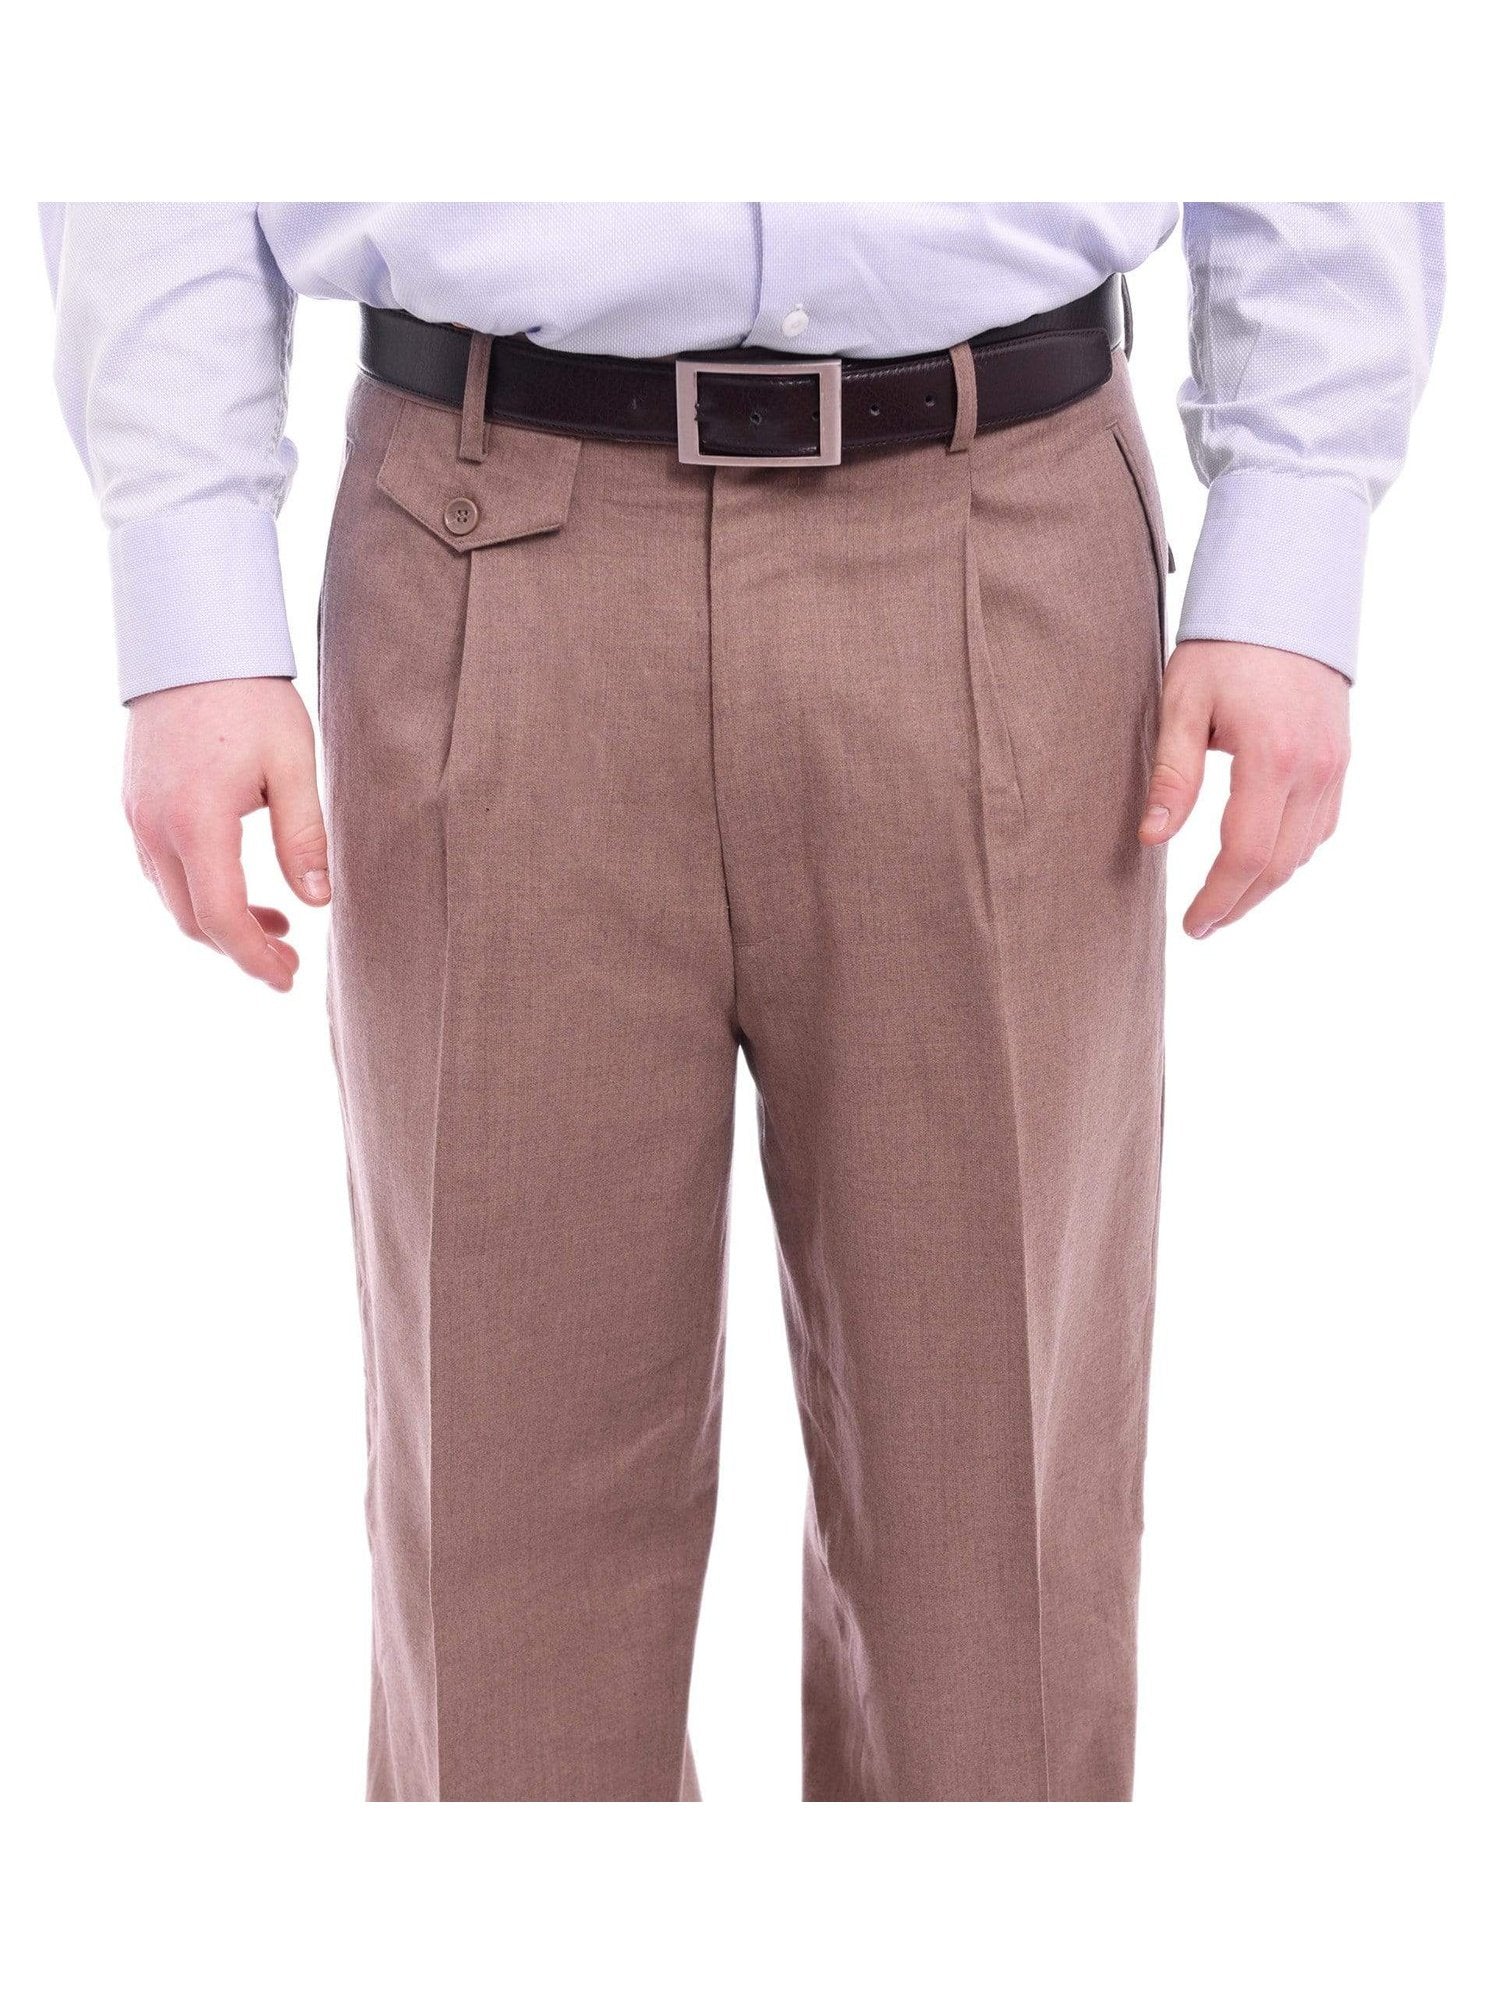 apollo king pants apollo king classic fit solid taupe single pleated wide leg wool dress pants 30770518524086